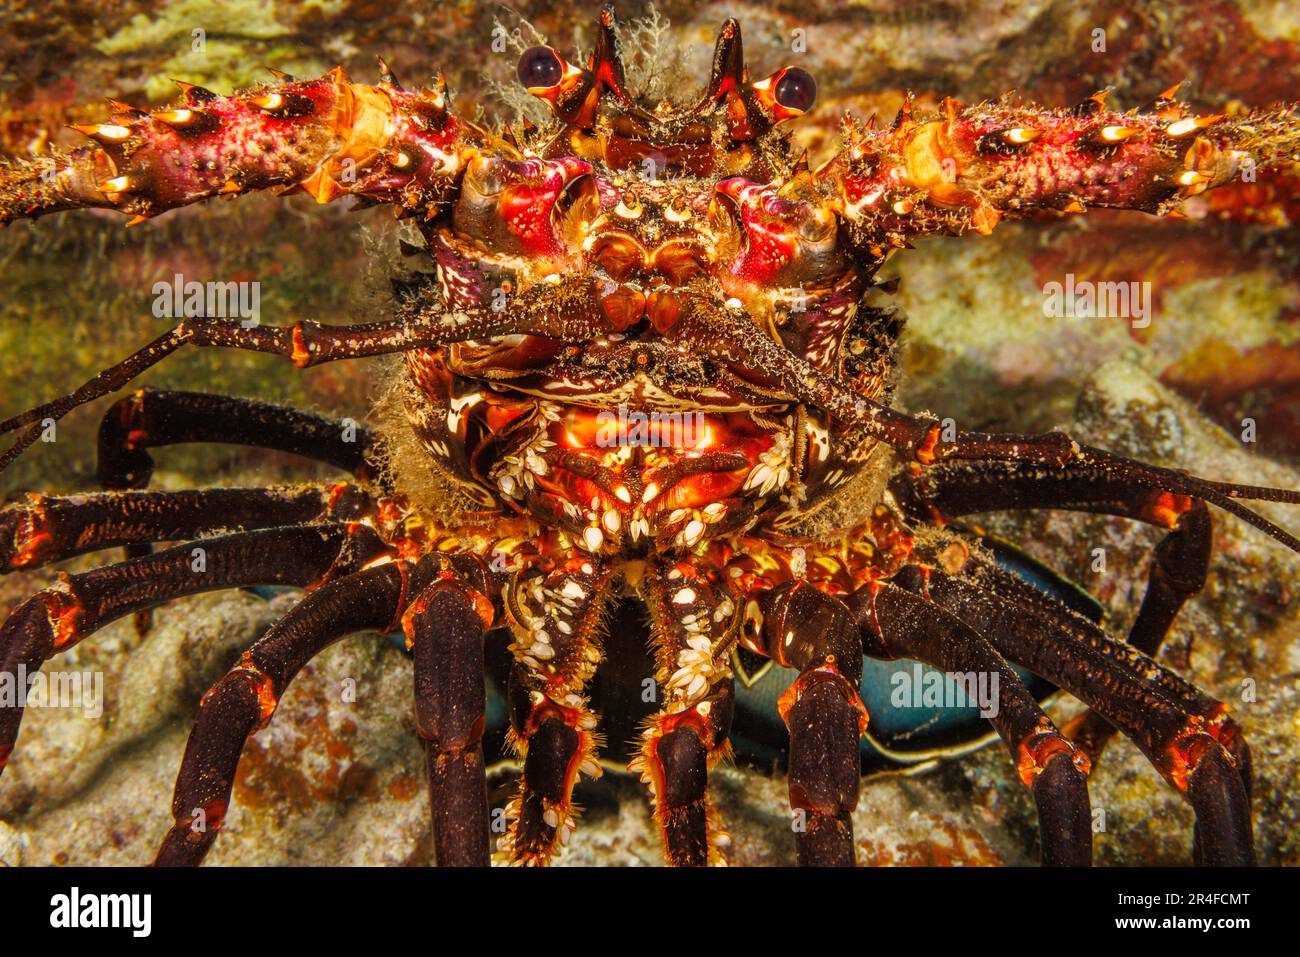 A close look at the front end of a banded spiny lobster, Panulirus marginatus, an endemic species. Hawaii. Parasitic barnacles, Paralepas sp. can be s Stock Photo